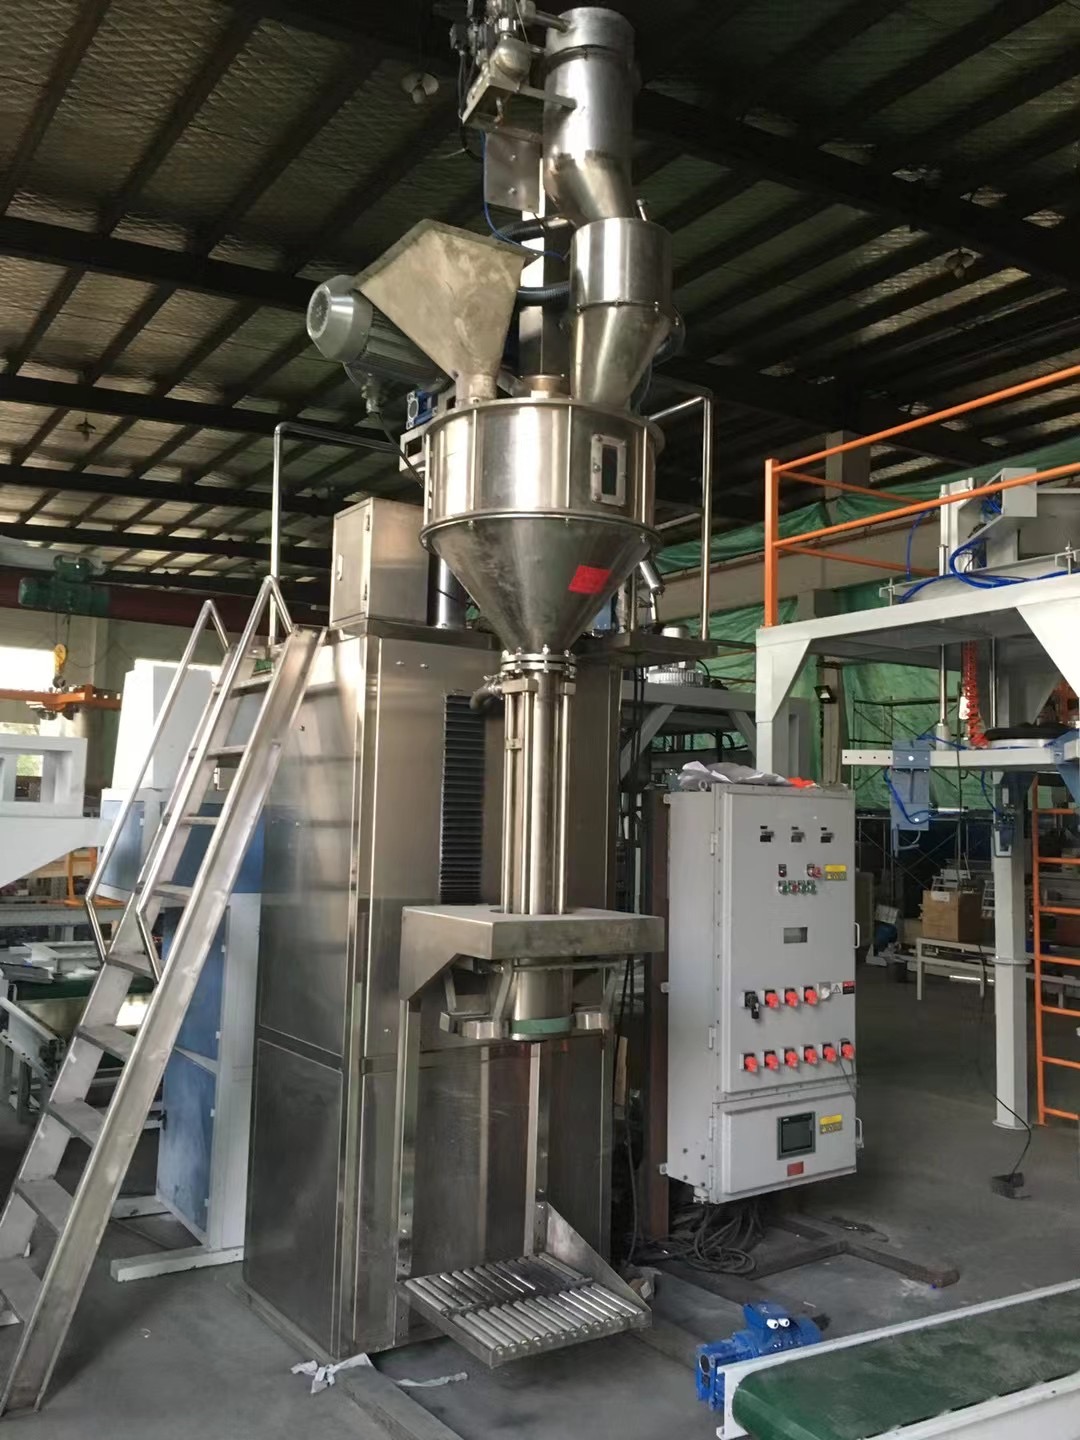 Vacuum Type Valve Bag Filling Machine Bulk Bag discharge system for resins powder big bag filling station for Calcium carbonate powder AUTOMATIC VFFS PACKING MACHINE 1kg sugar granules containerised w